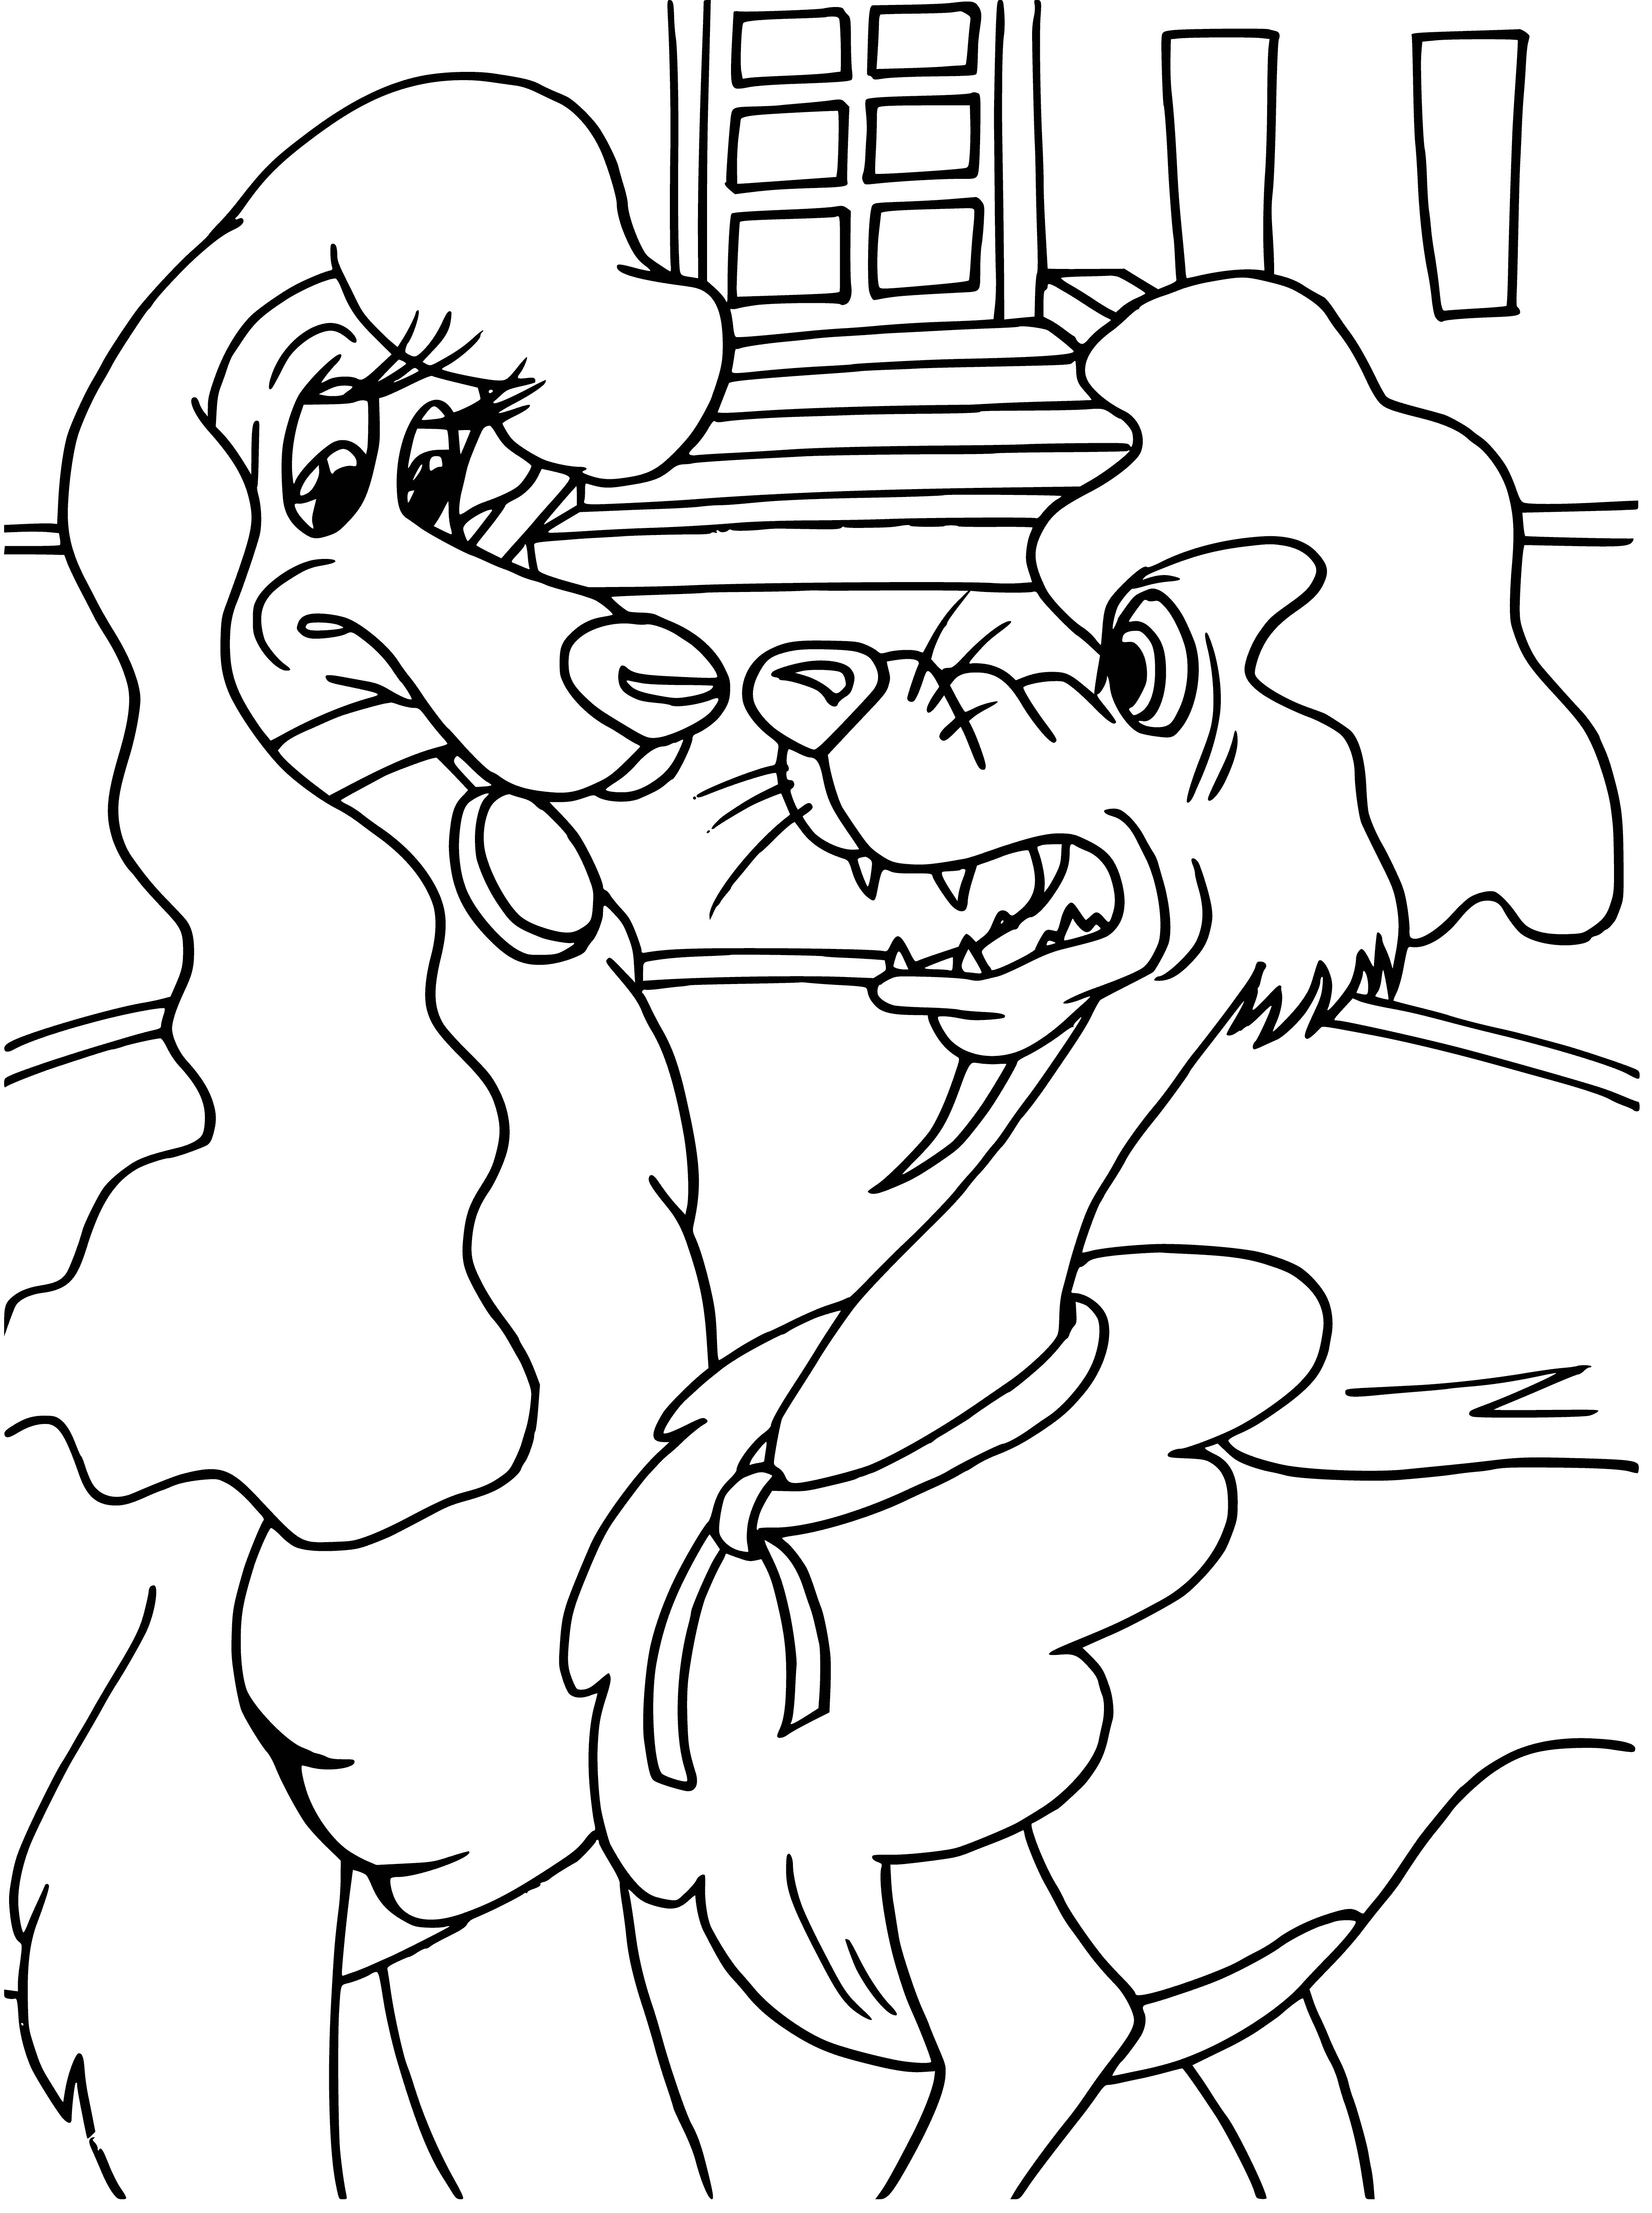 coloring page: The Gascon Saintongeois is a French dog breed that is descended from the St Hubert's Hound, Bloodhound, & Basset Hound. It is a large dog that comes in a variety of colors w/ a harsh outer and soft, downy undercoat. It is active, w/ a strong hunting instinct & loud bark.